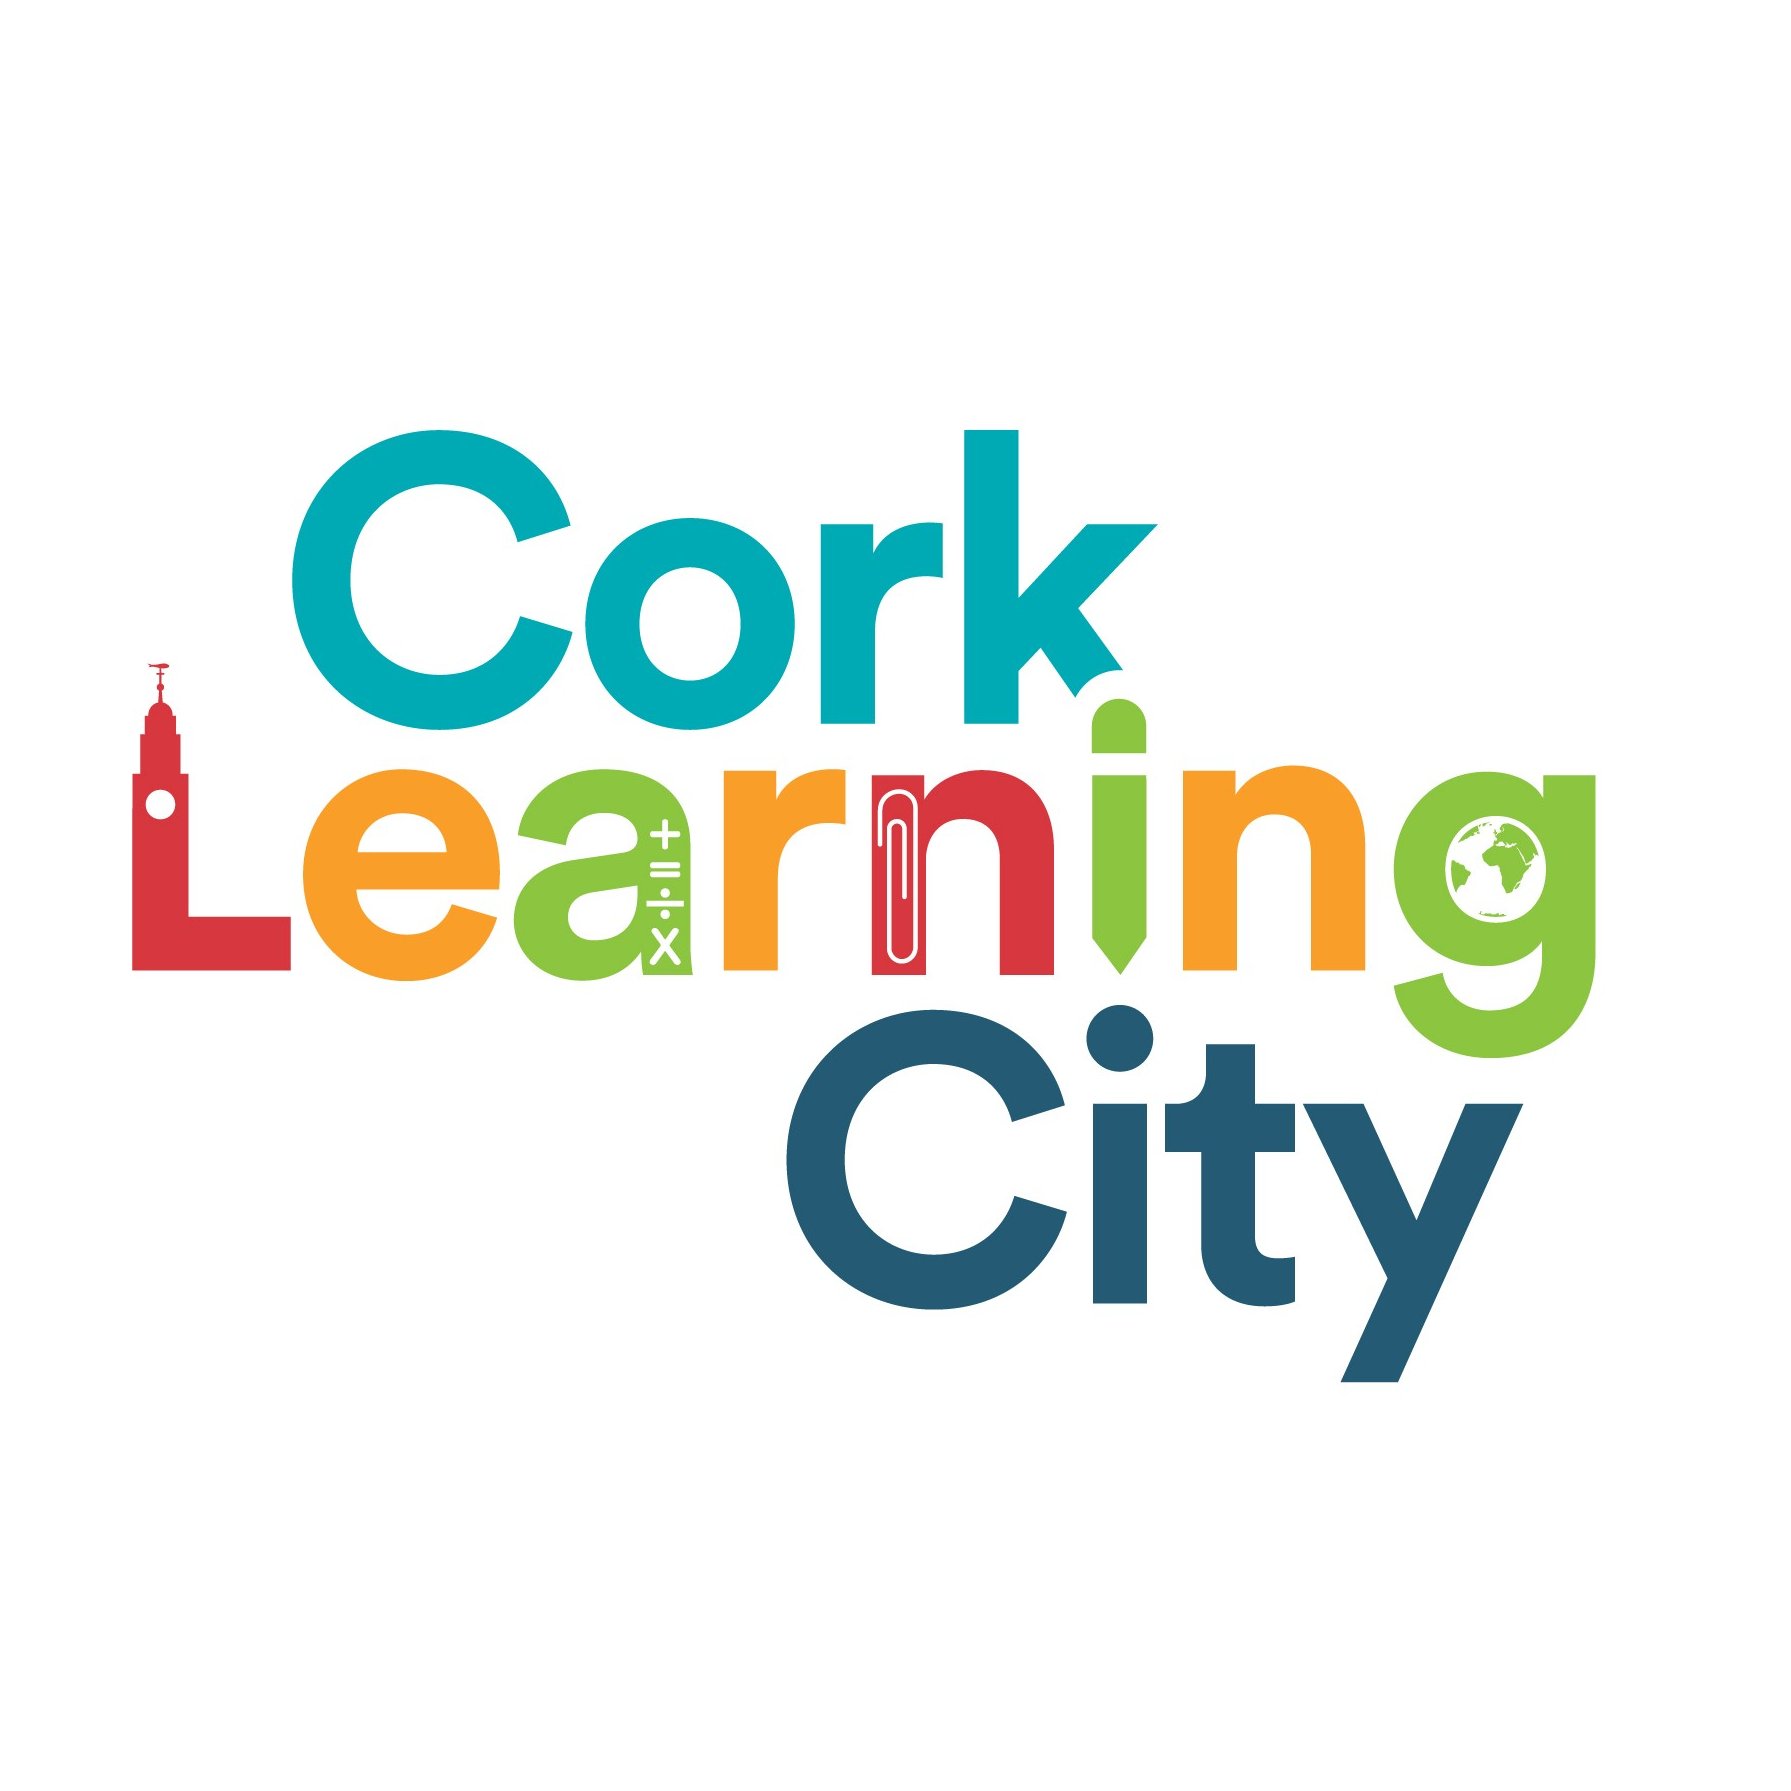 Celebrating all things learning in Cork City! #CorkLovesLearning #CorkCelebratesLearning